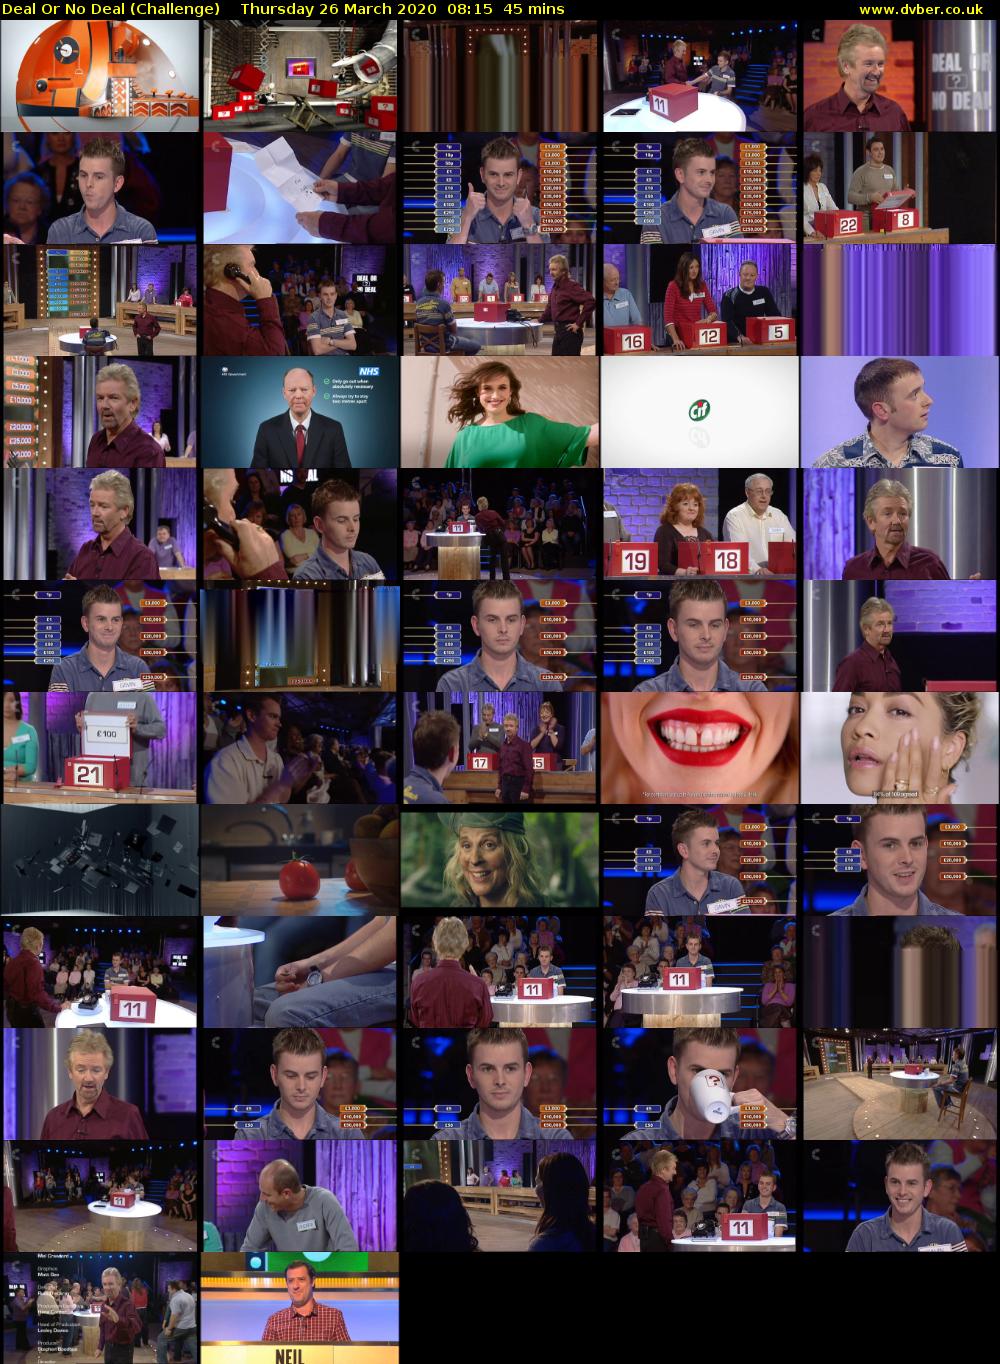 Deal Or No Deal (Challenge) Thursday 26 March 2020 08:15 - 09:00